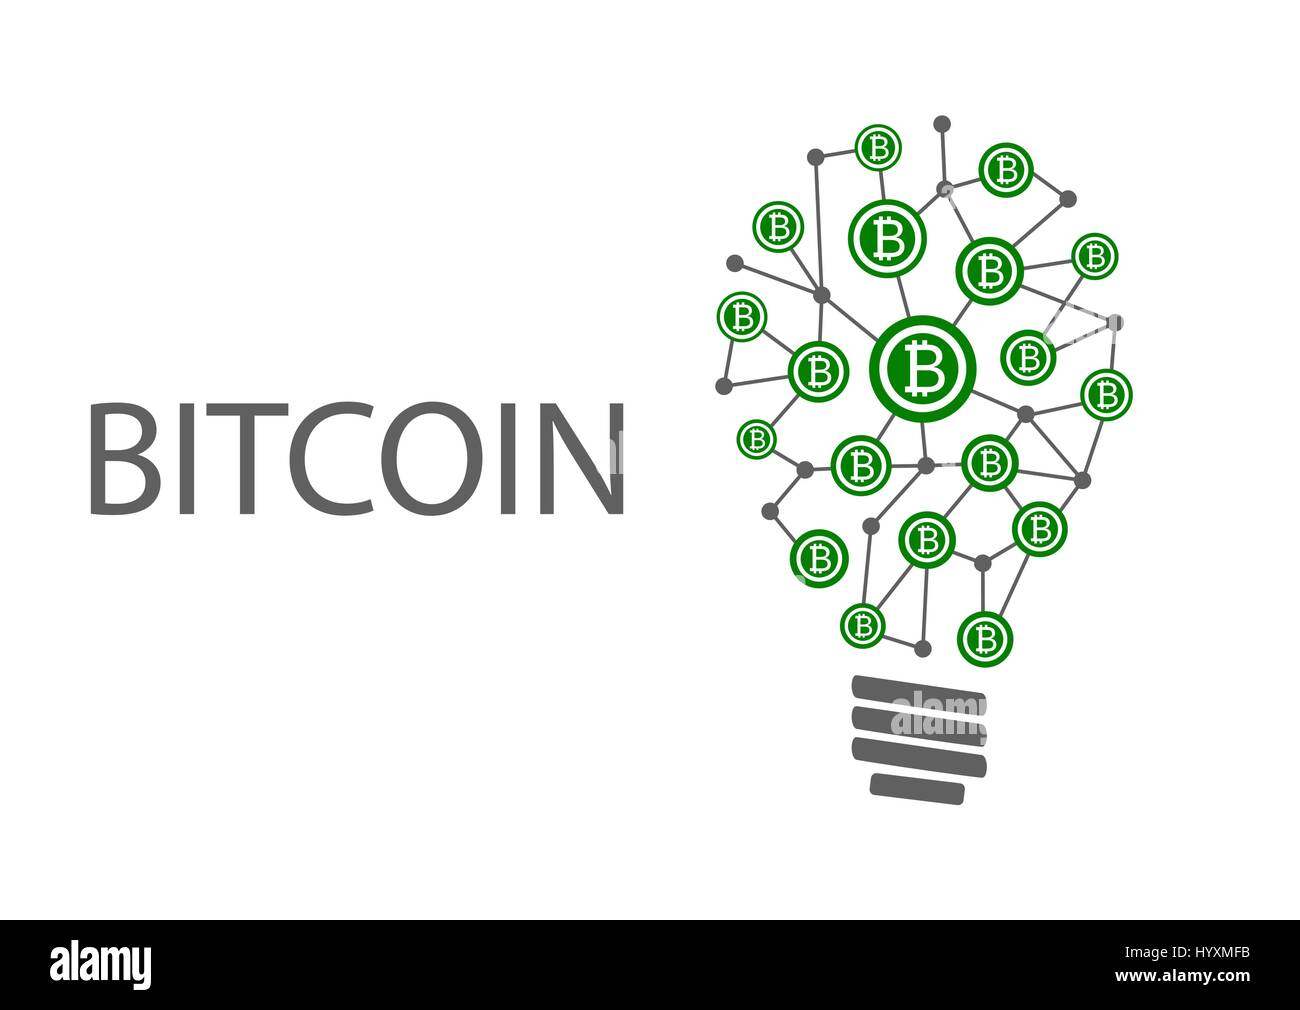 Bitcoin vector illustration with light bulb and text Stock Vector